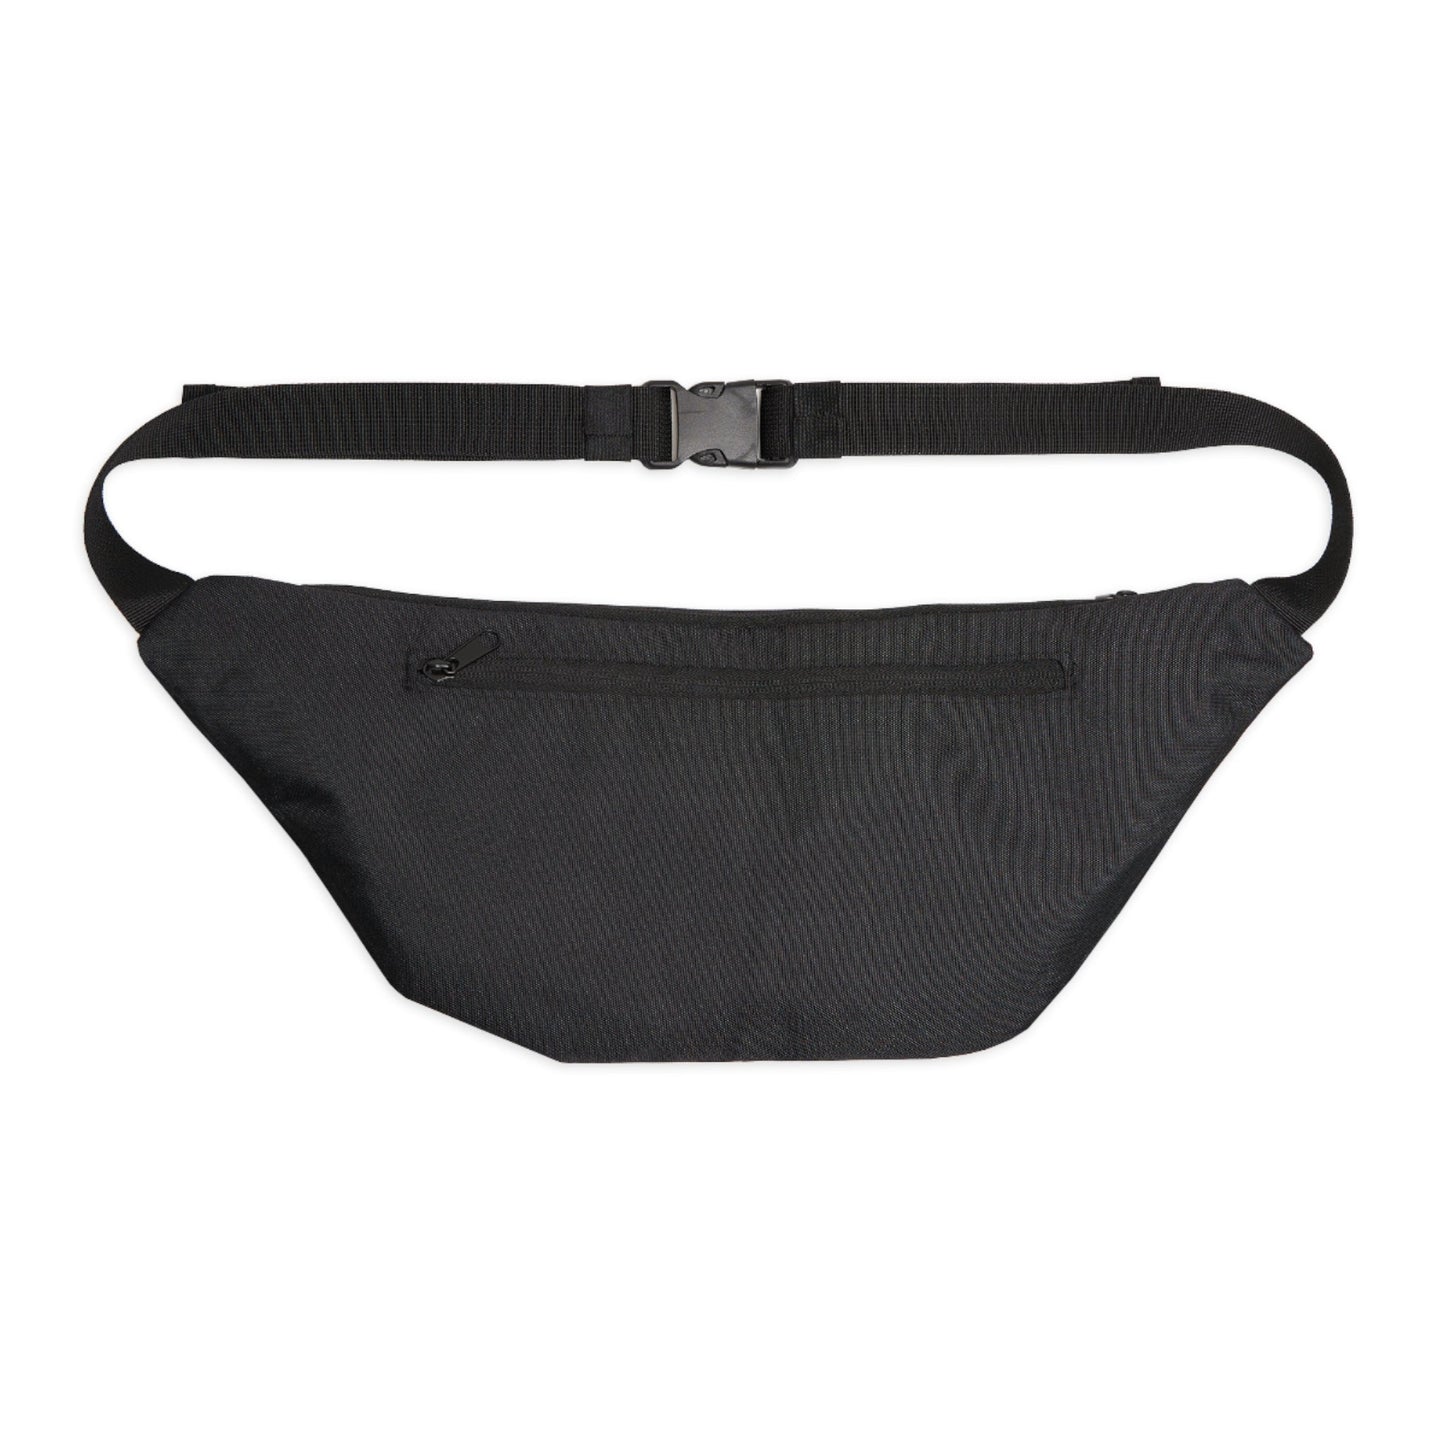 BENNY : Large Fanny Pack - Shaggy Chic